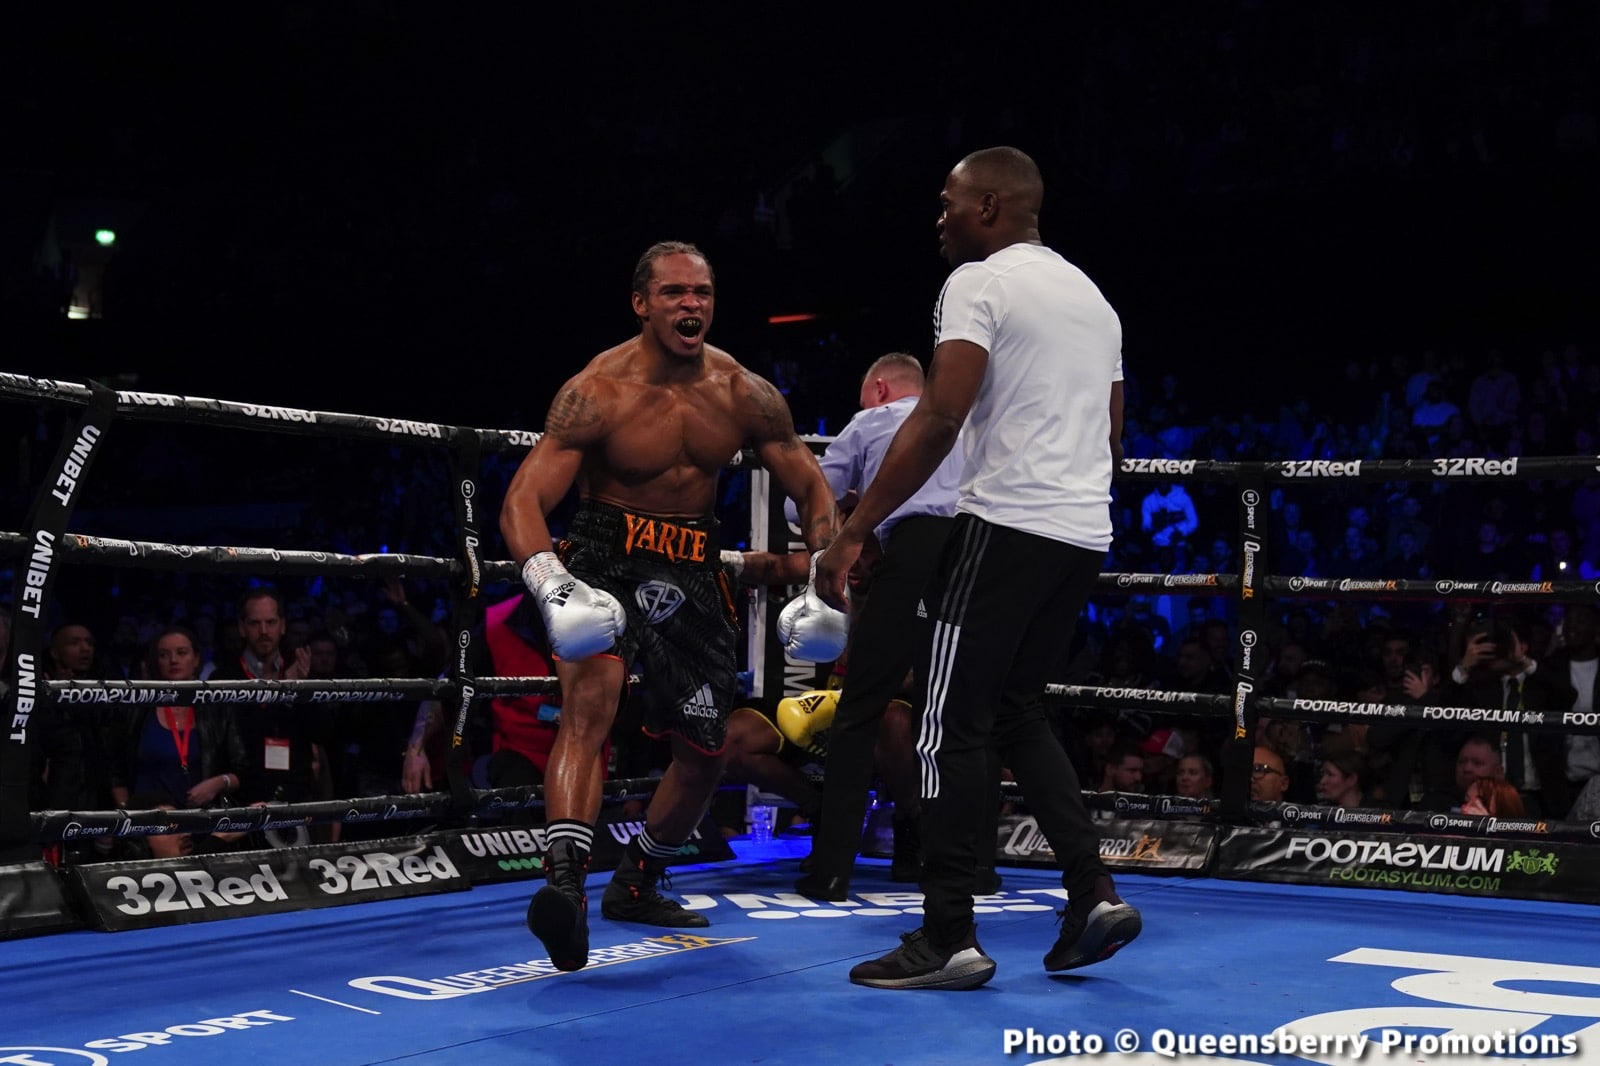 Yarde On Beterbiev Fight: “I Know You've Got Him Picked, But The Man's In Trouble!”